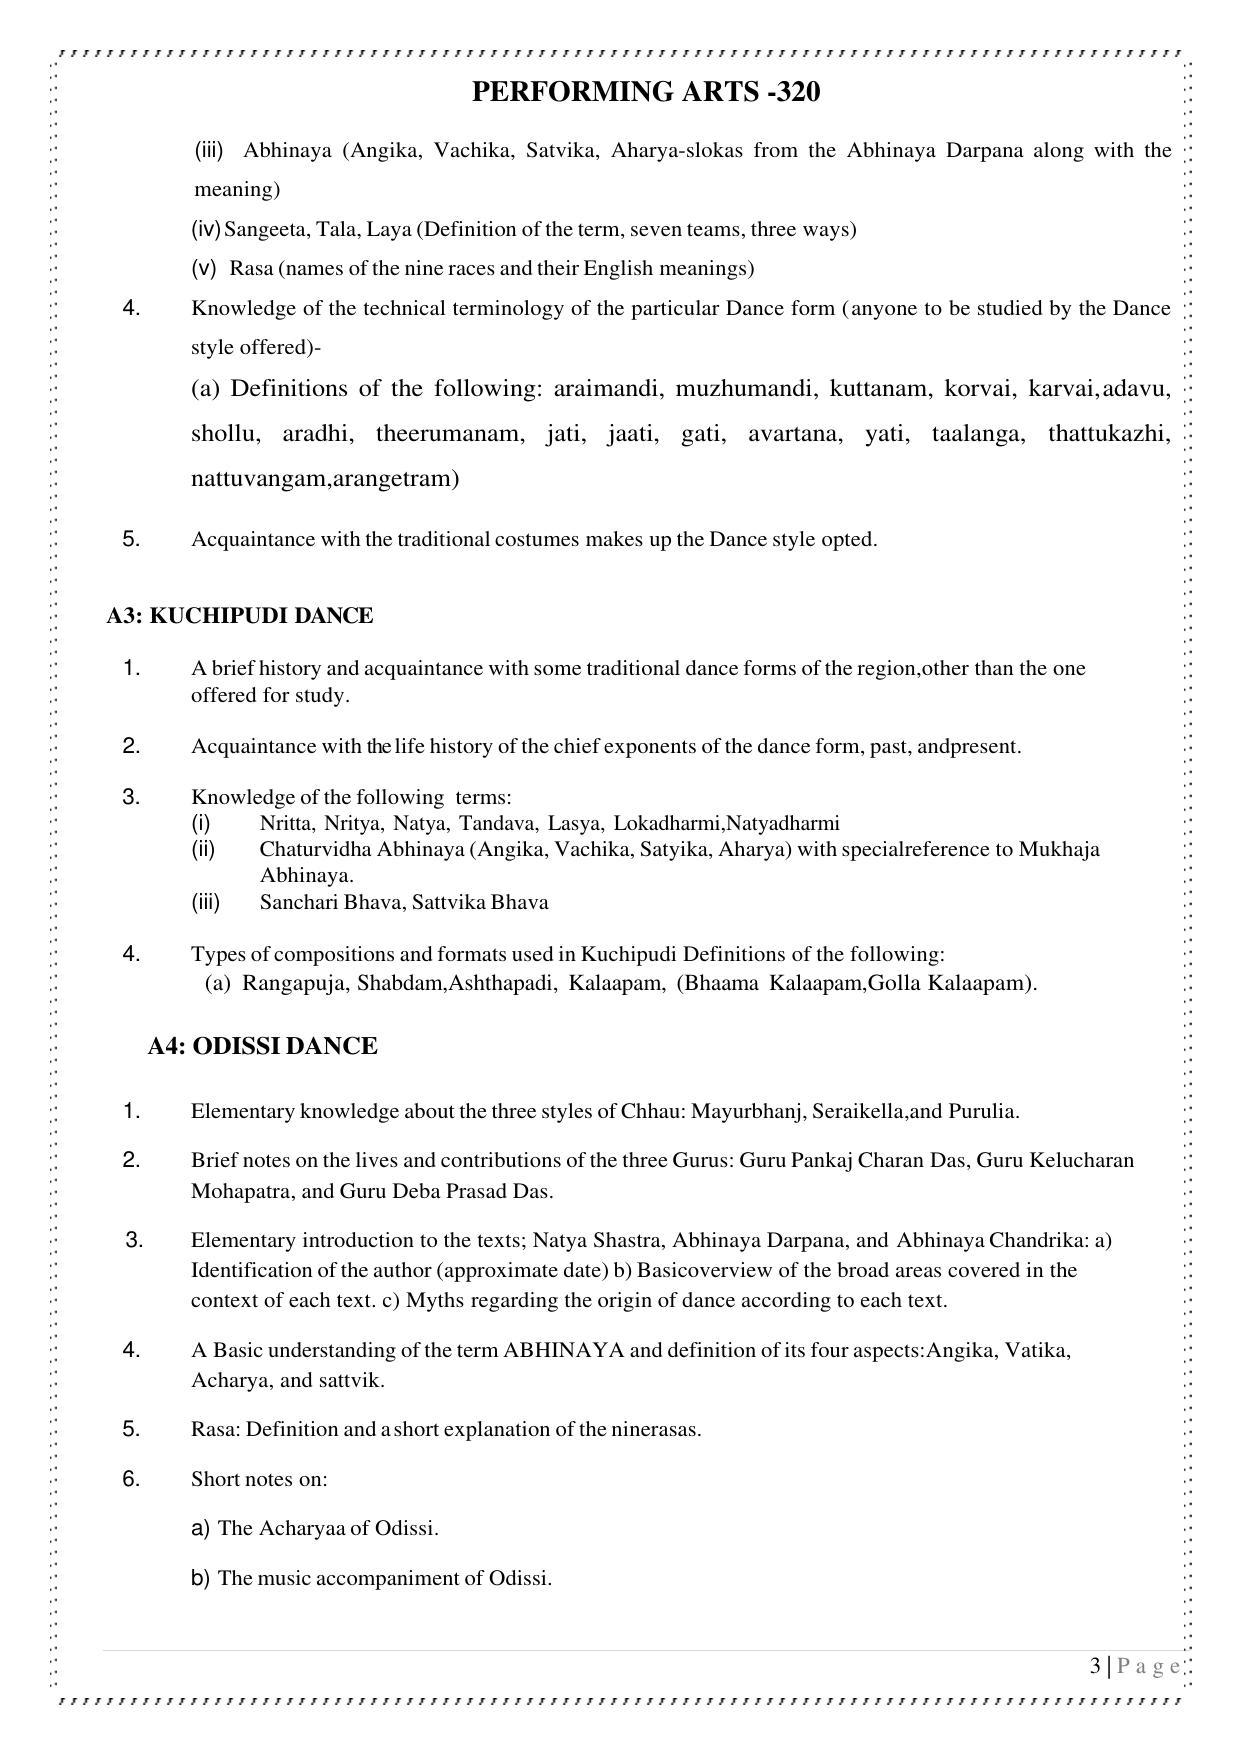 CUET Syllabus for Performing Arts (English) - Page 3